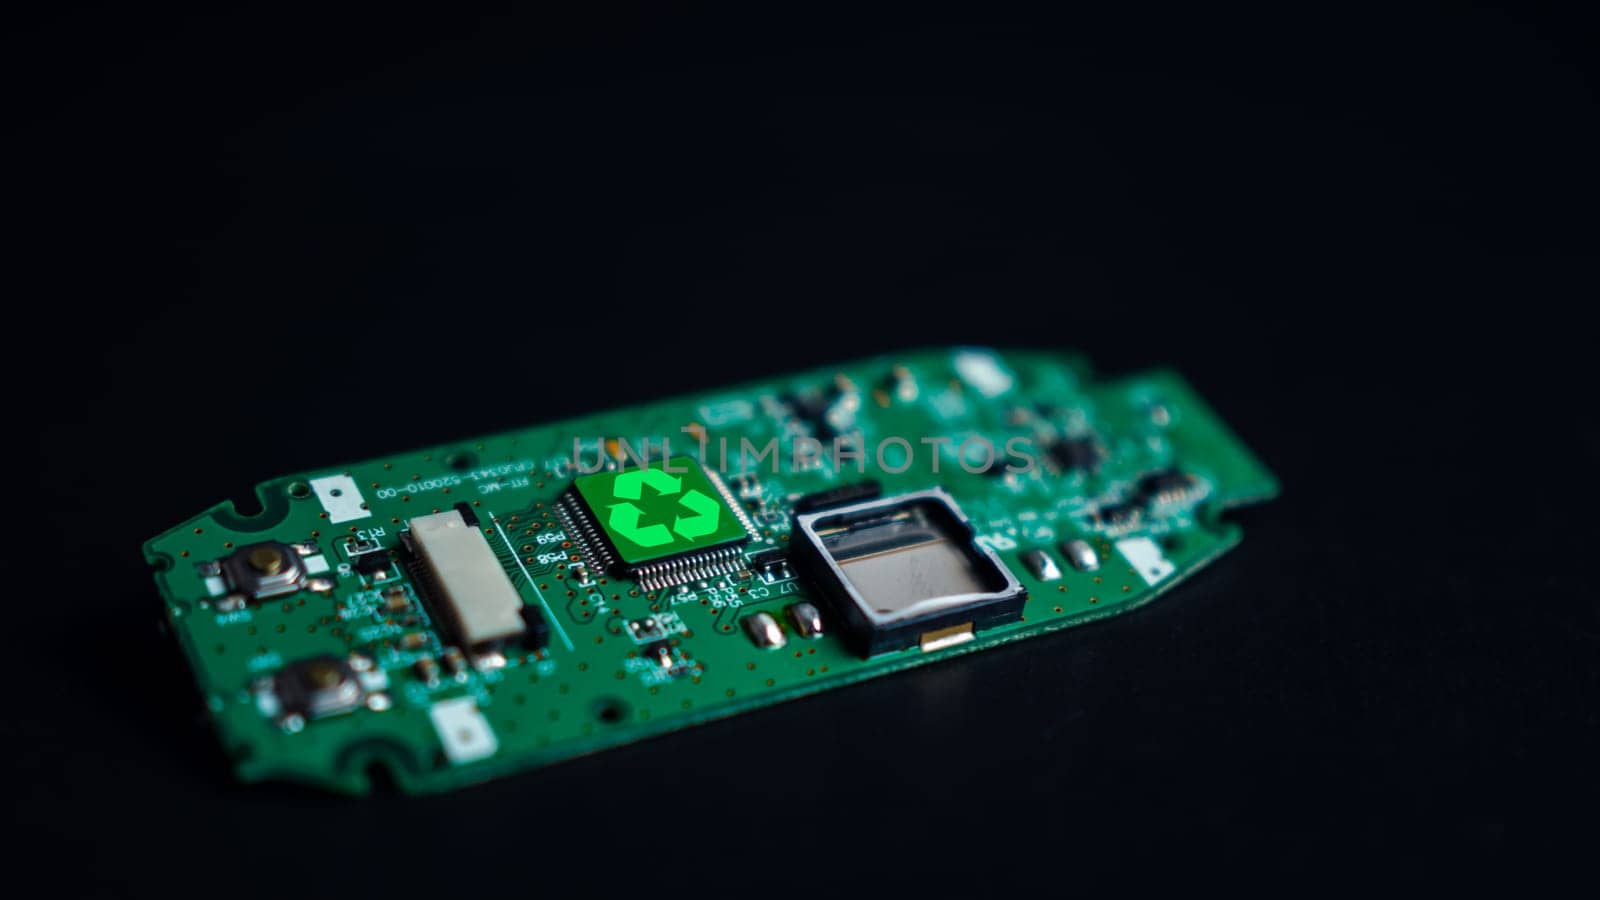 Green recycle sign on circuit board technology innovations on dark background, Concept of green technology, Environment Green Technology Computer Chip, Green Computing and Technology, CSR, Esg.